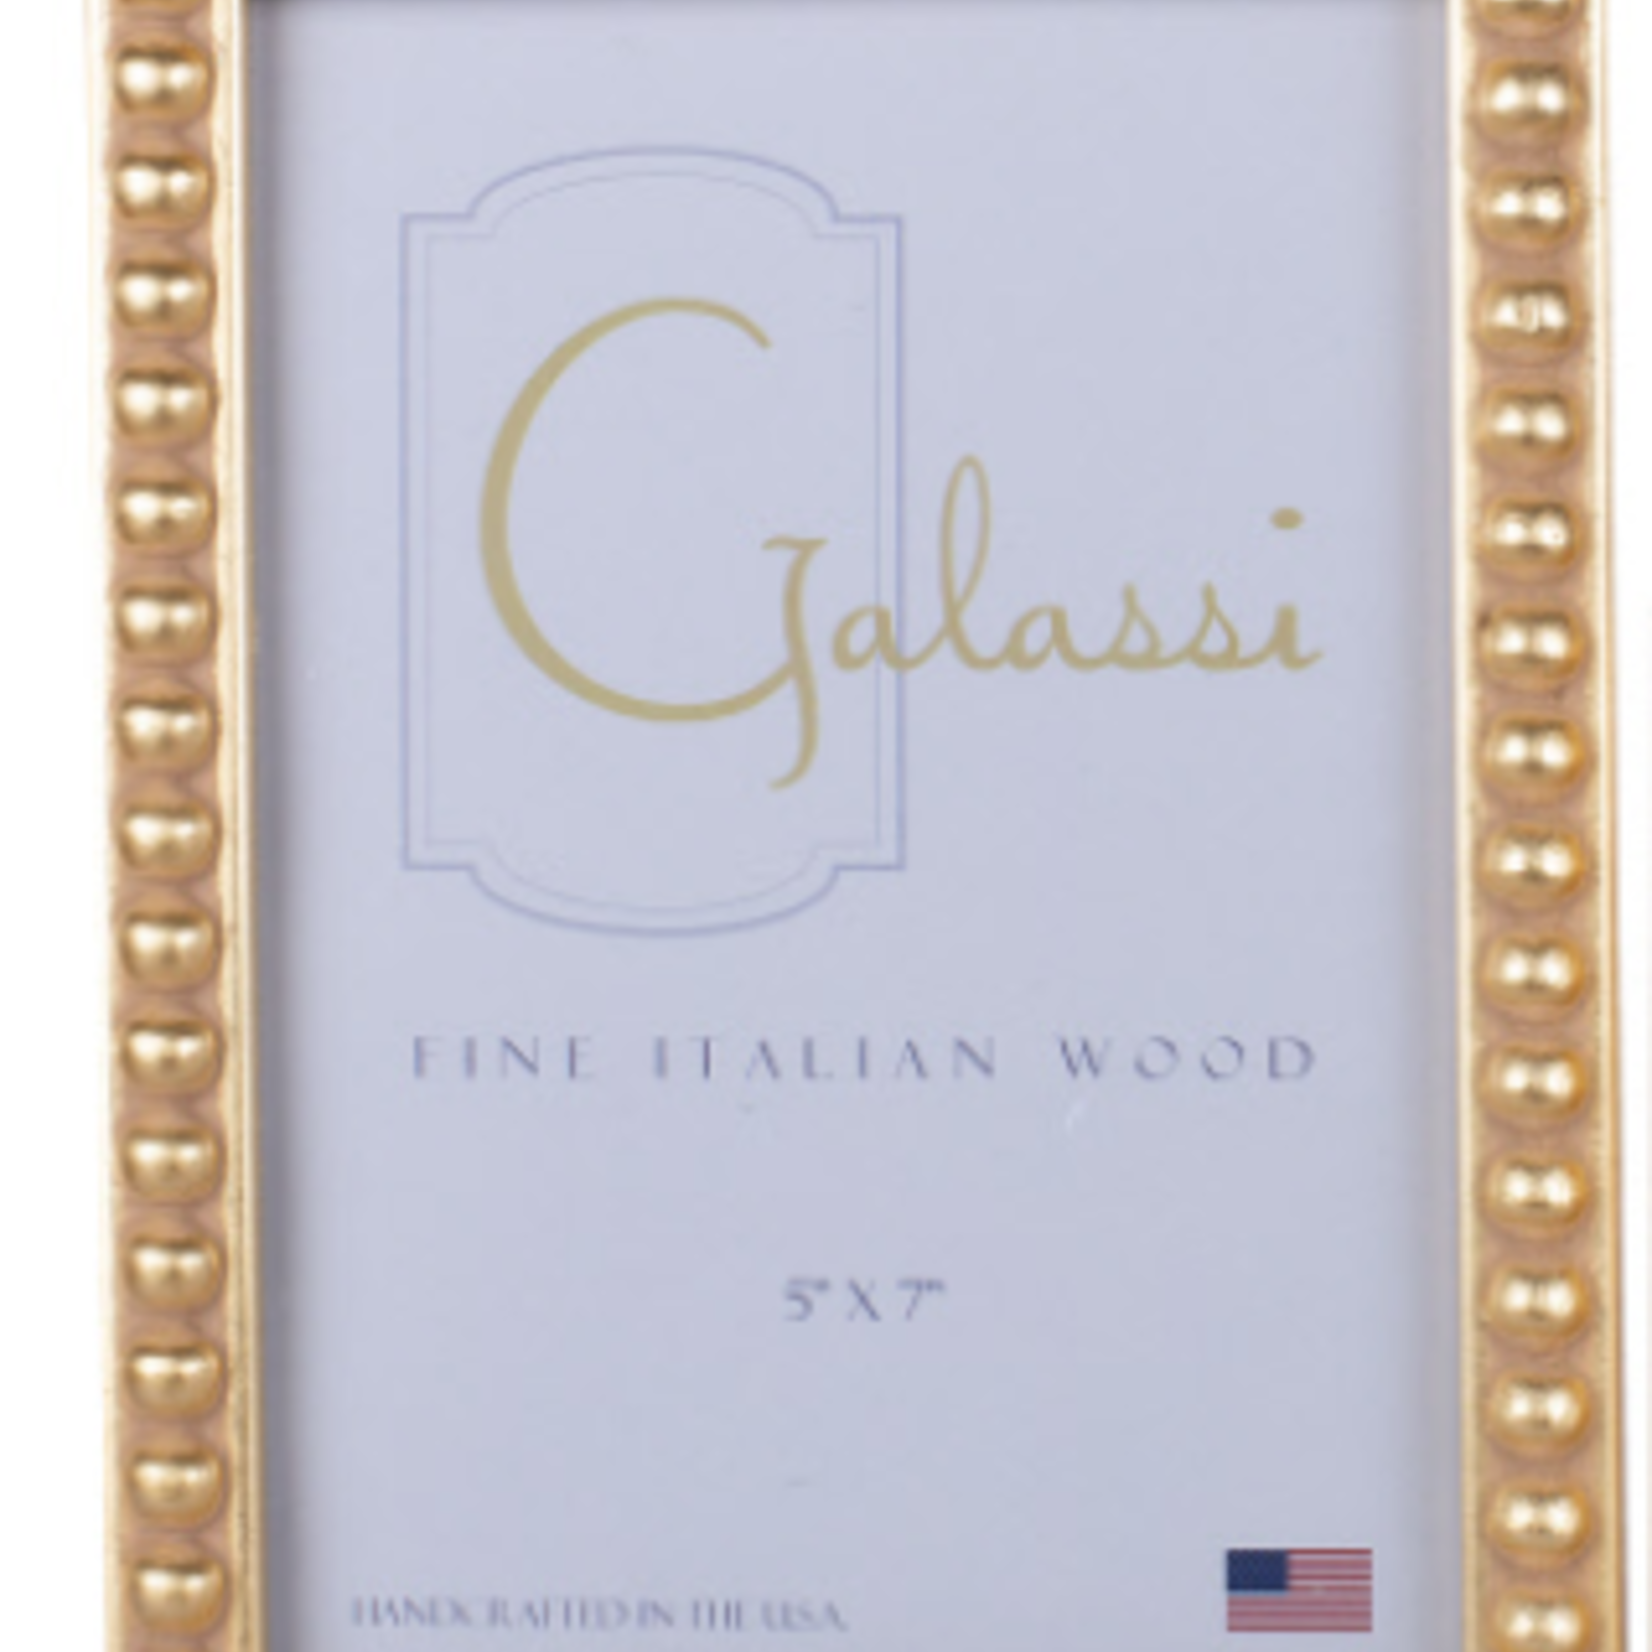 Galassi Diana Gold 8 x 10 Picture Frame